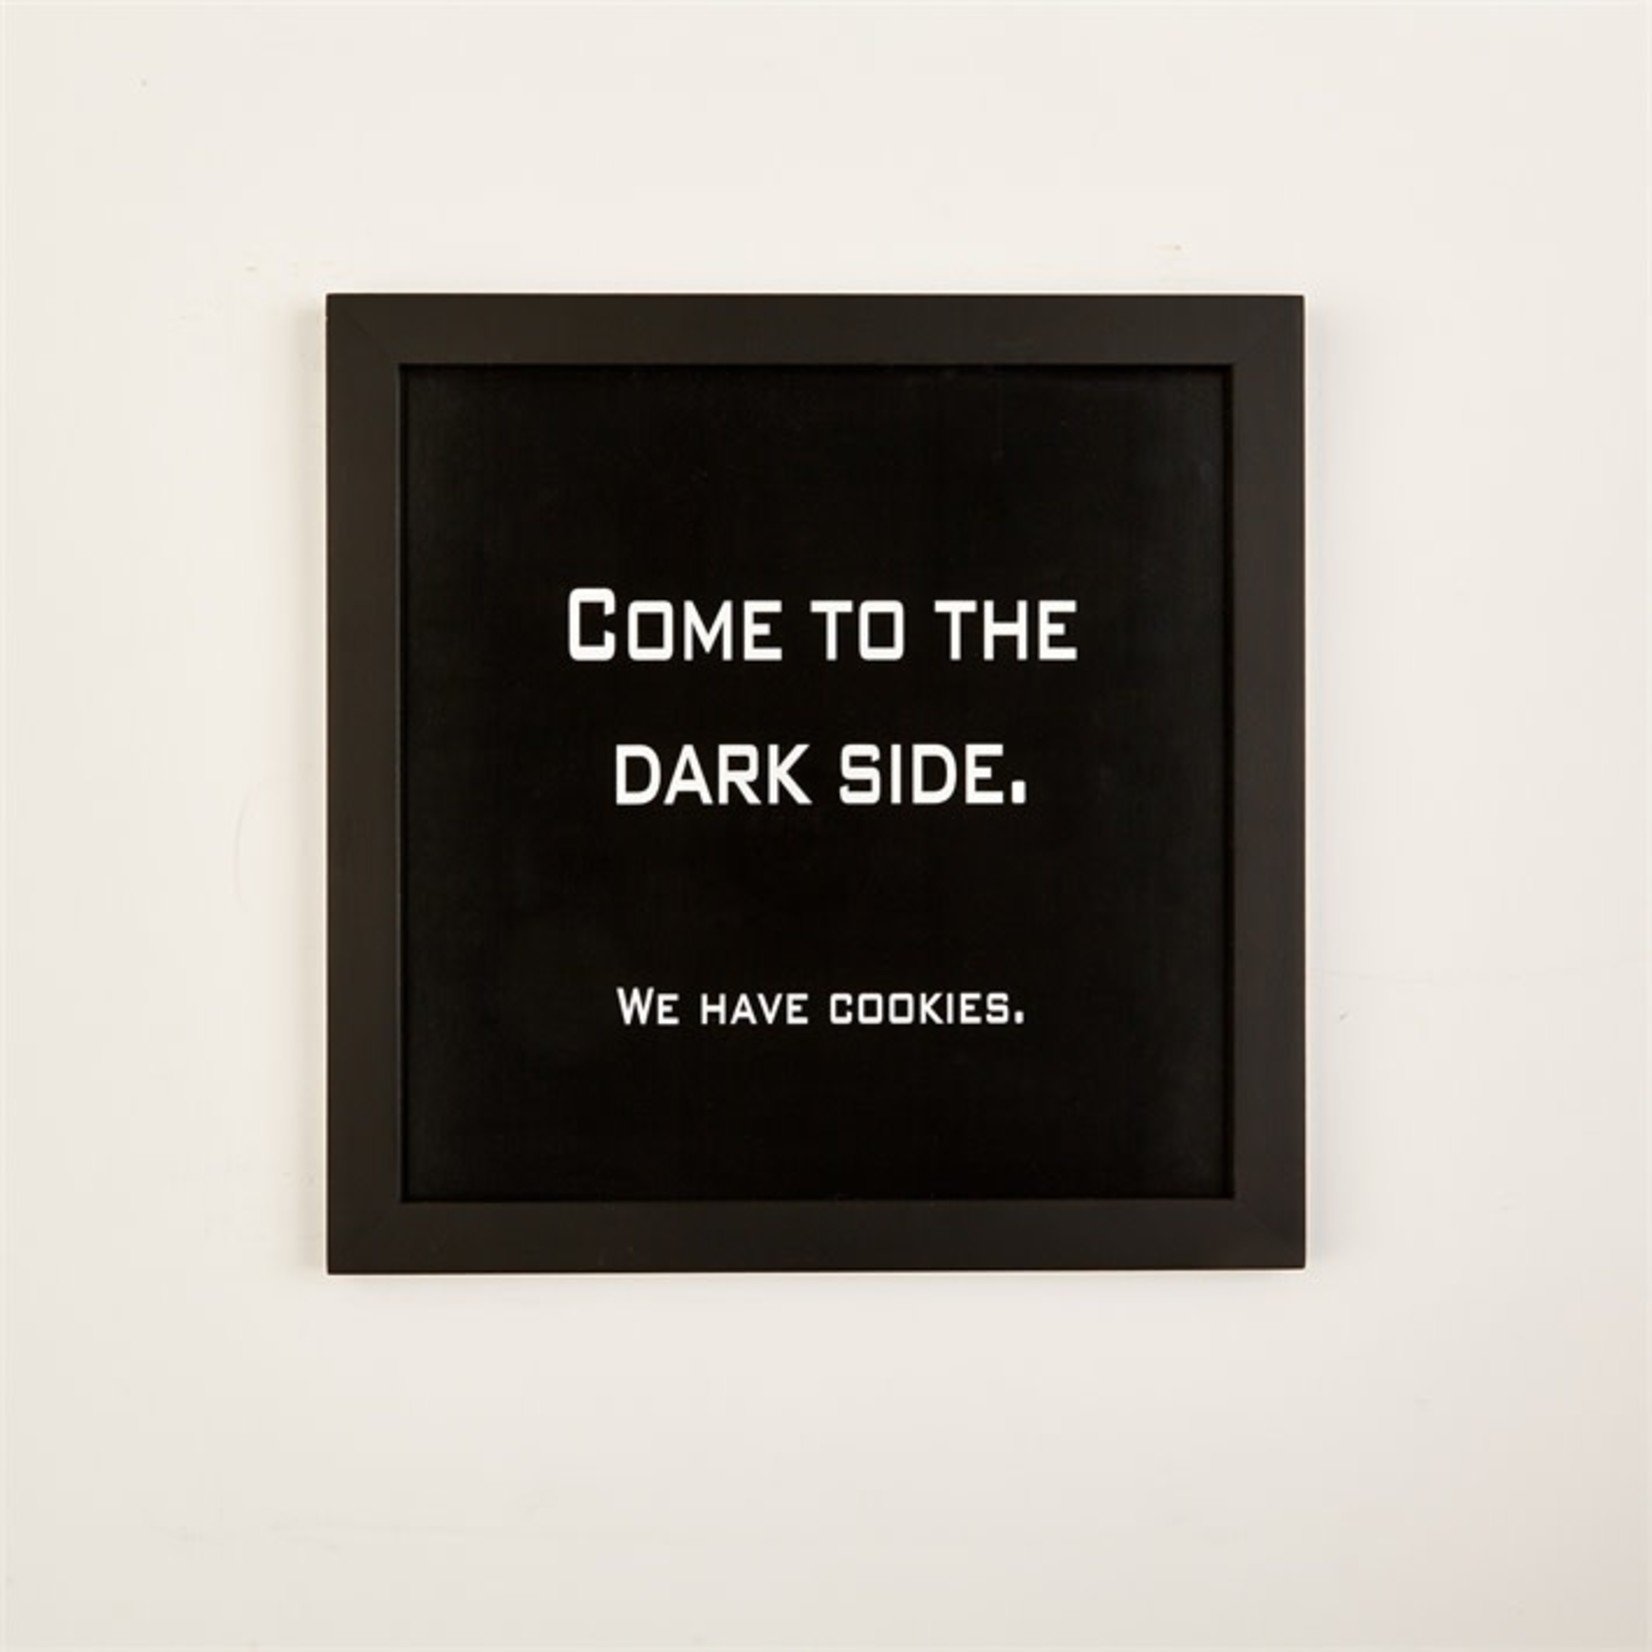 Mickler & Co. Wall Art - "Come To The Dark Side"